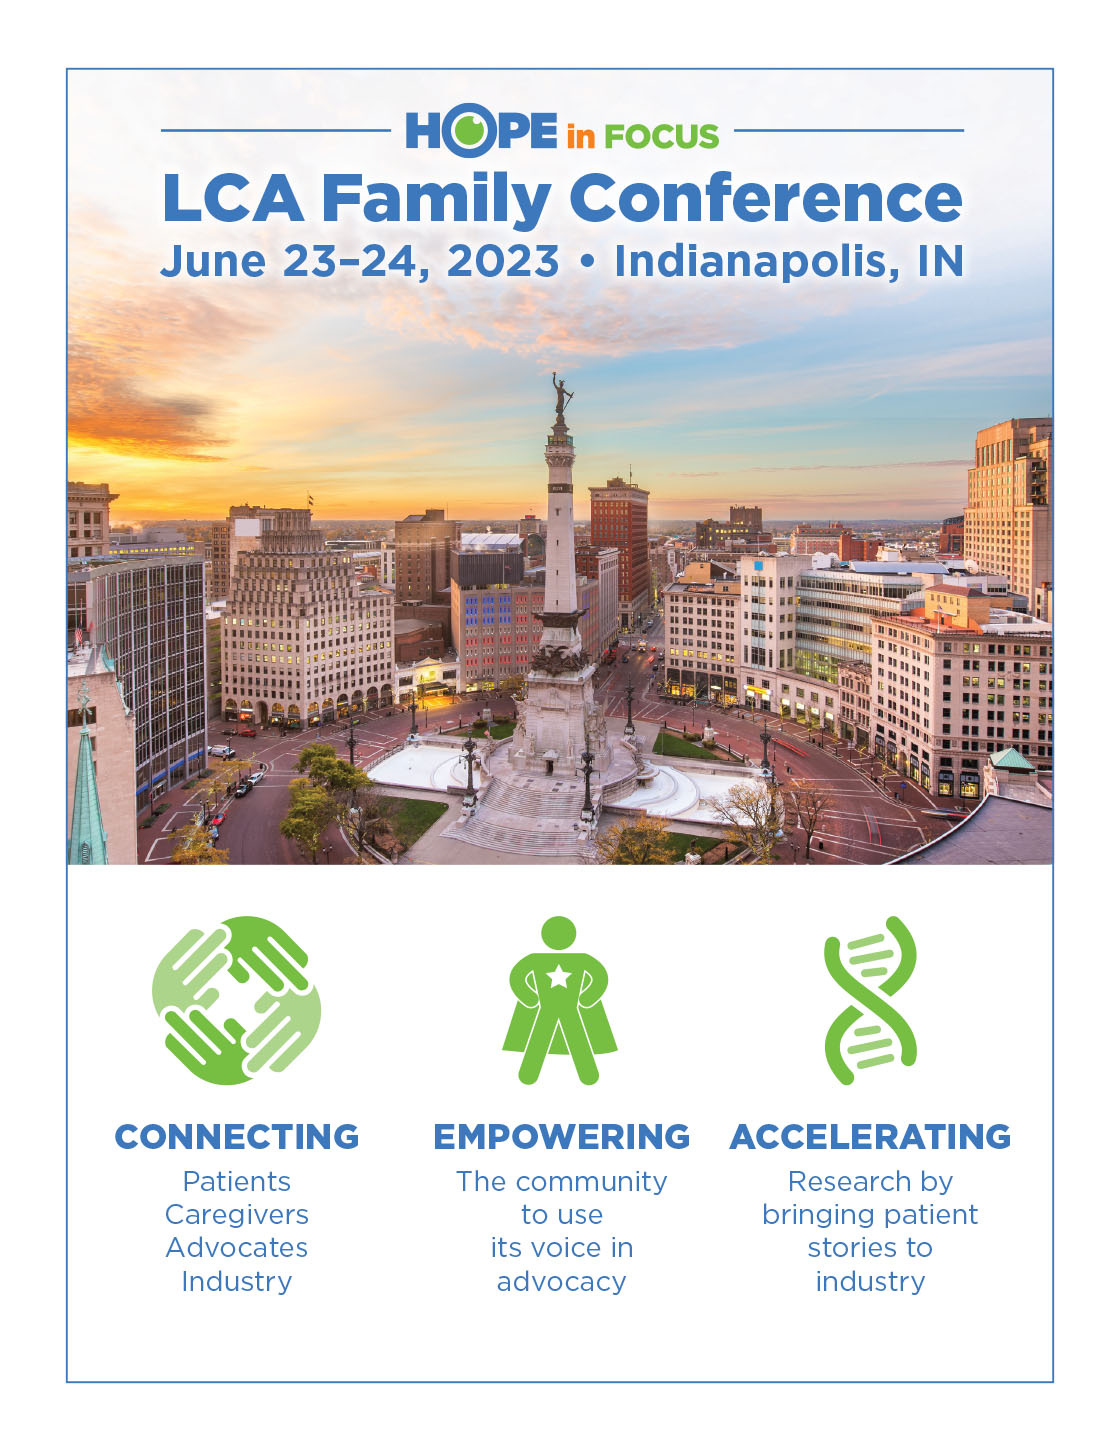 Ready, Set, Go! Hope in Focus 2023 LCA Family Conference Brings